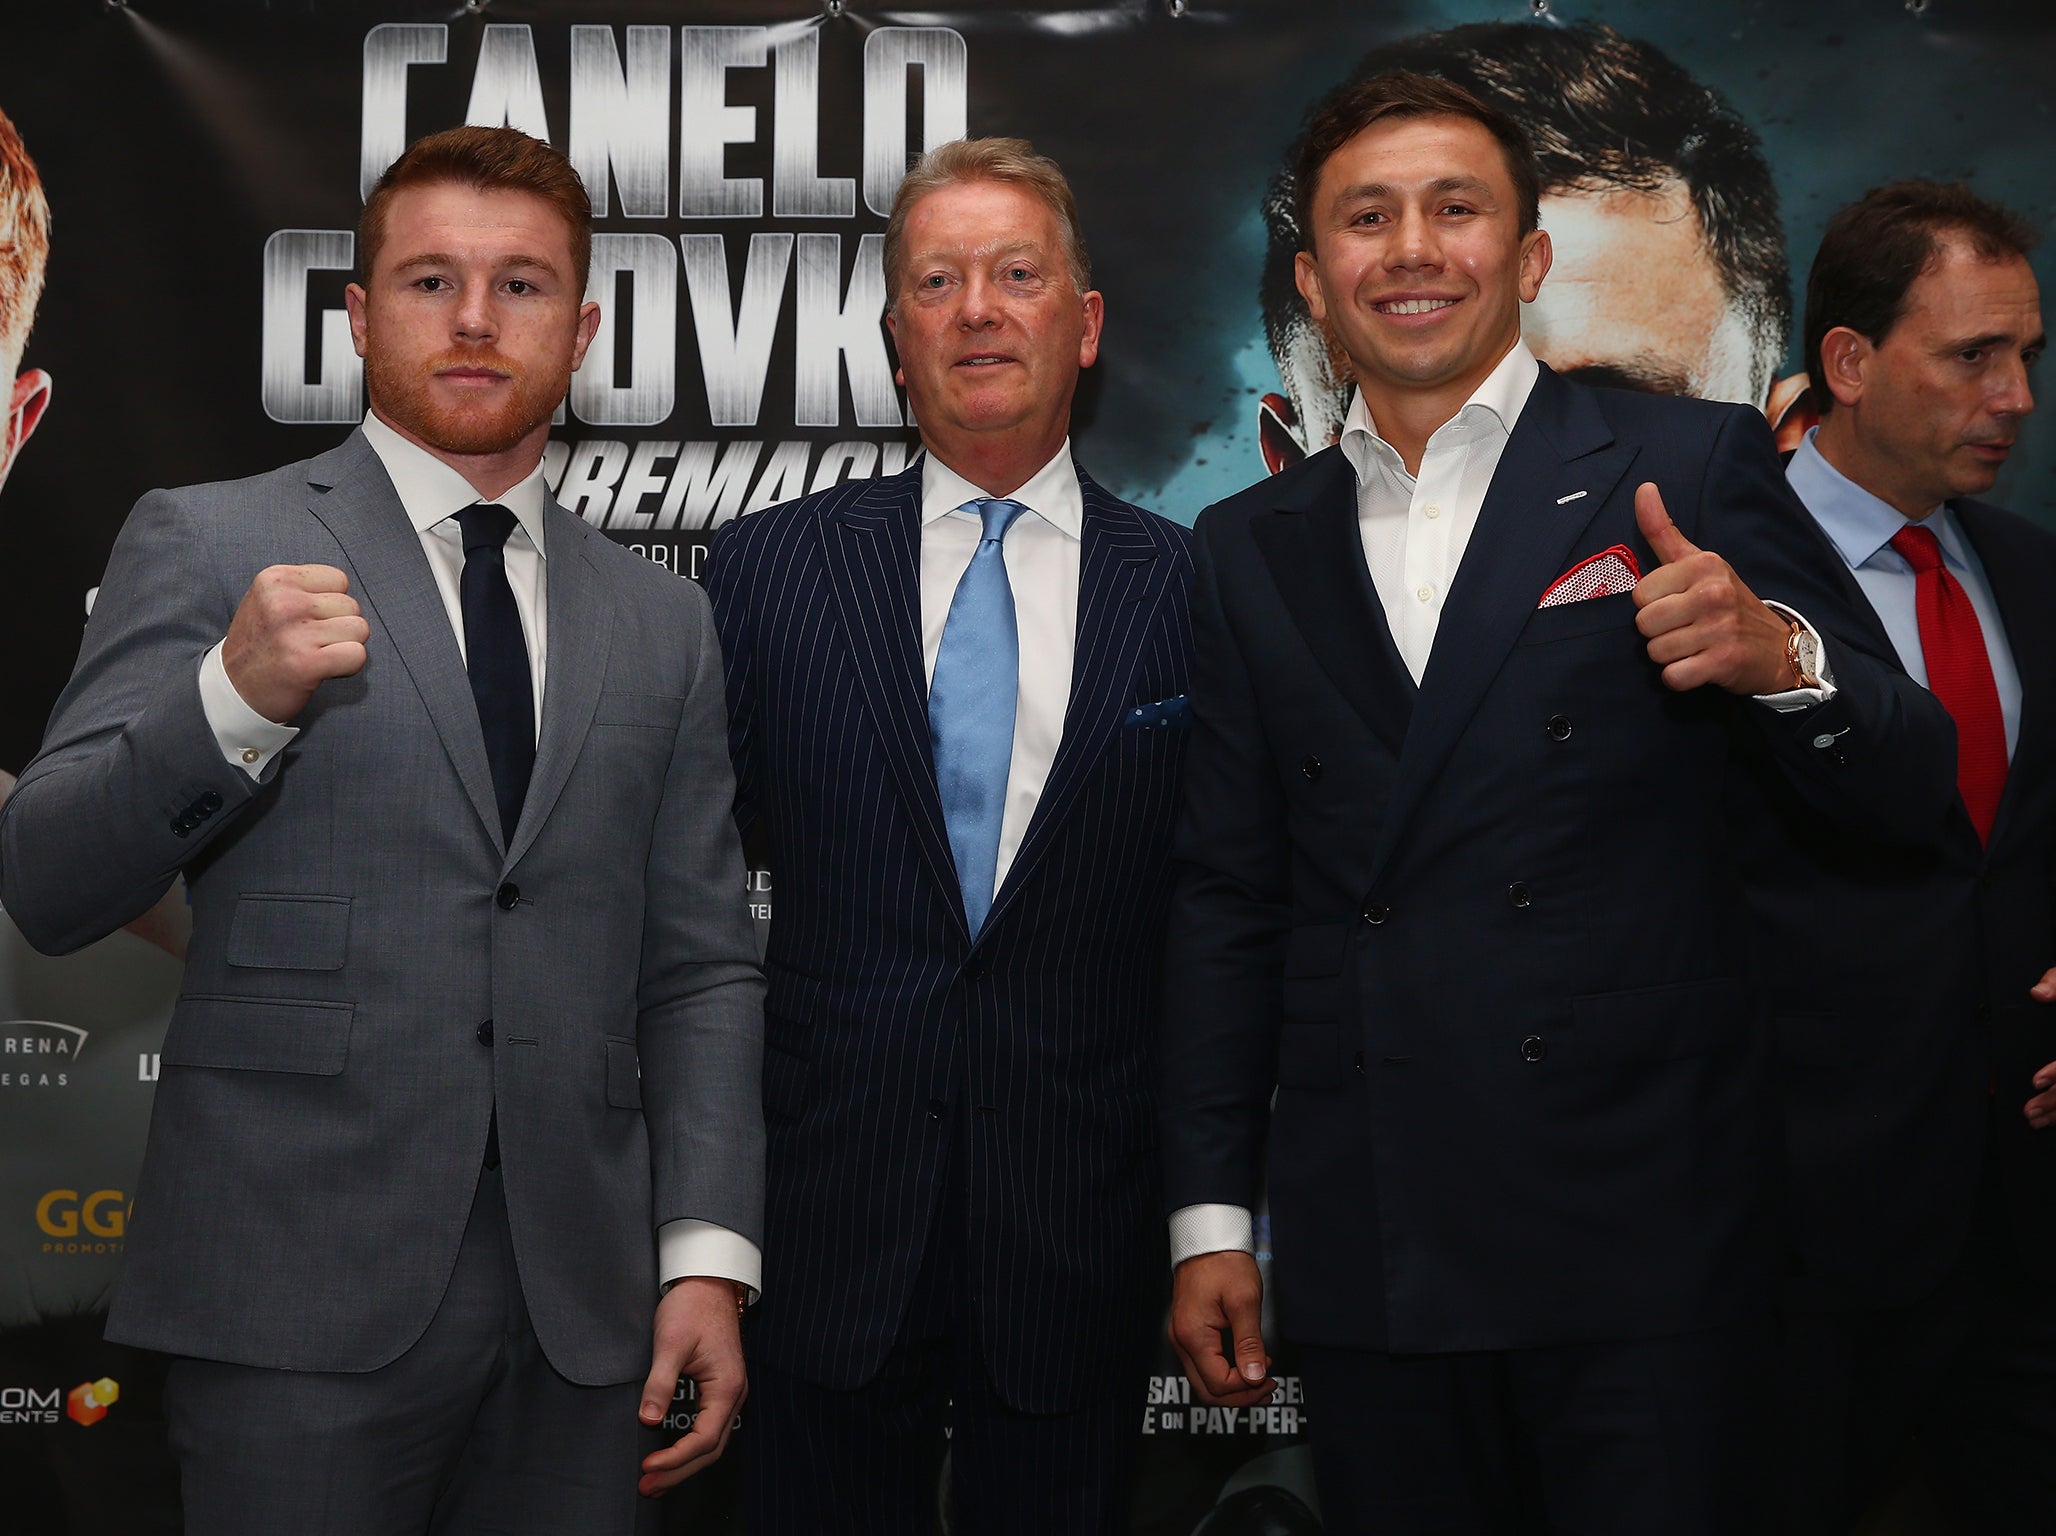 Canelo and Golovkin pose with Frank Warren